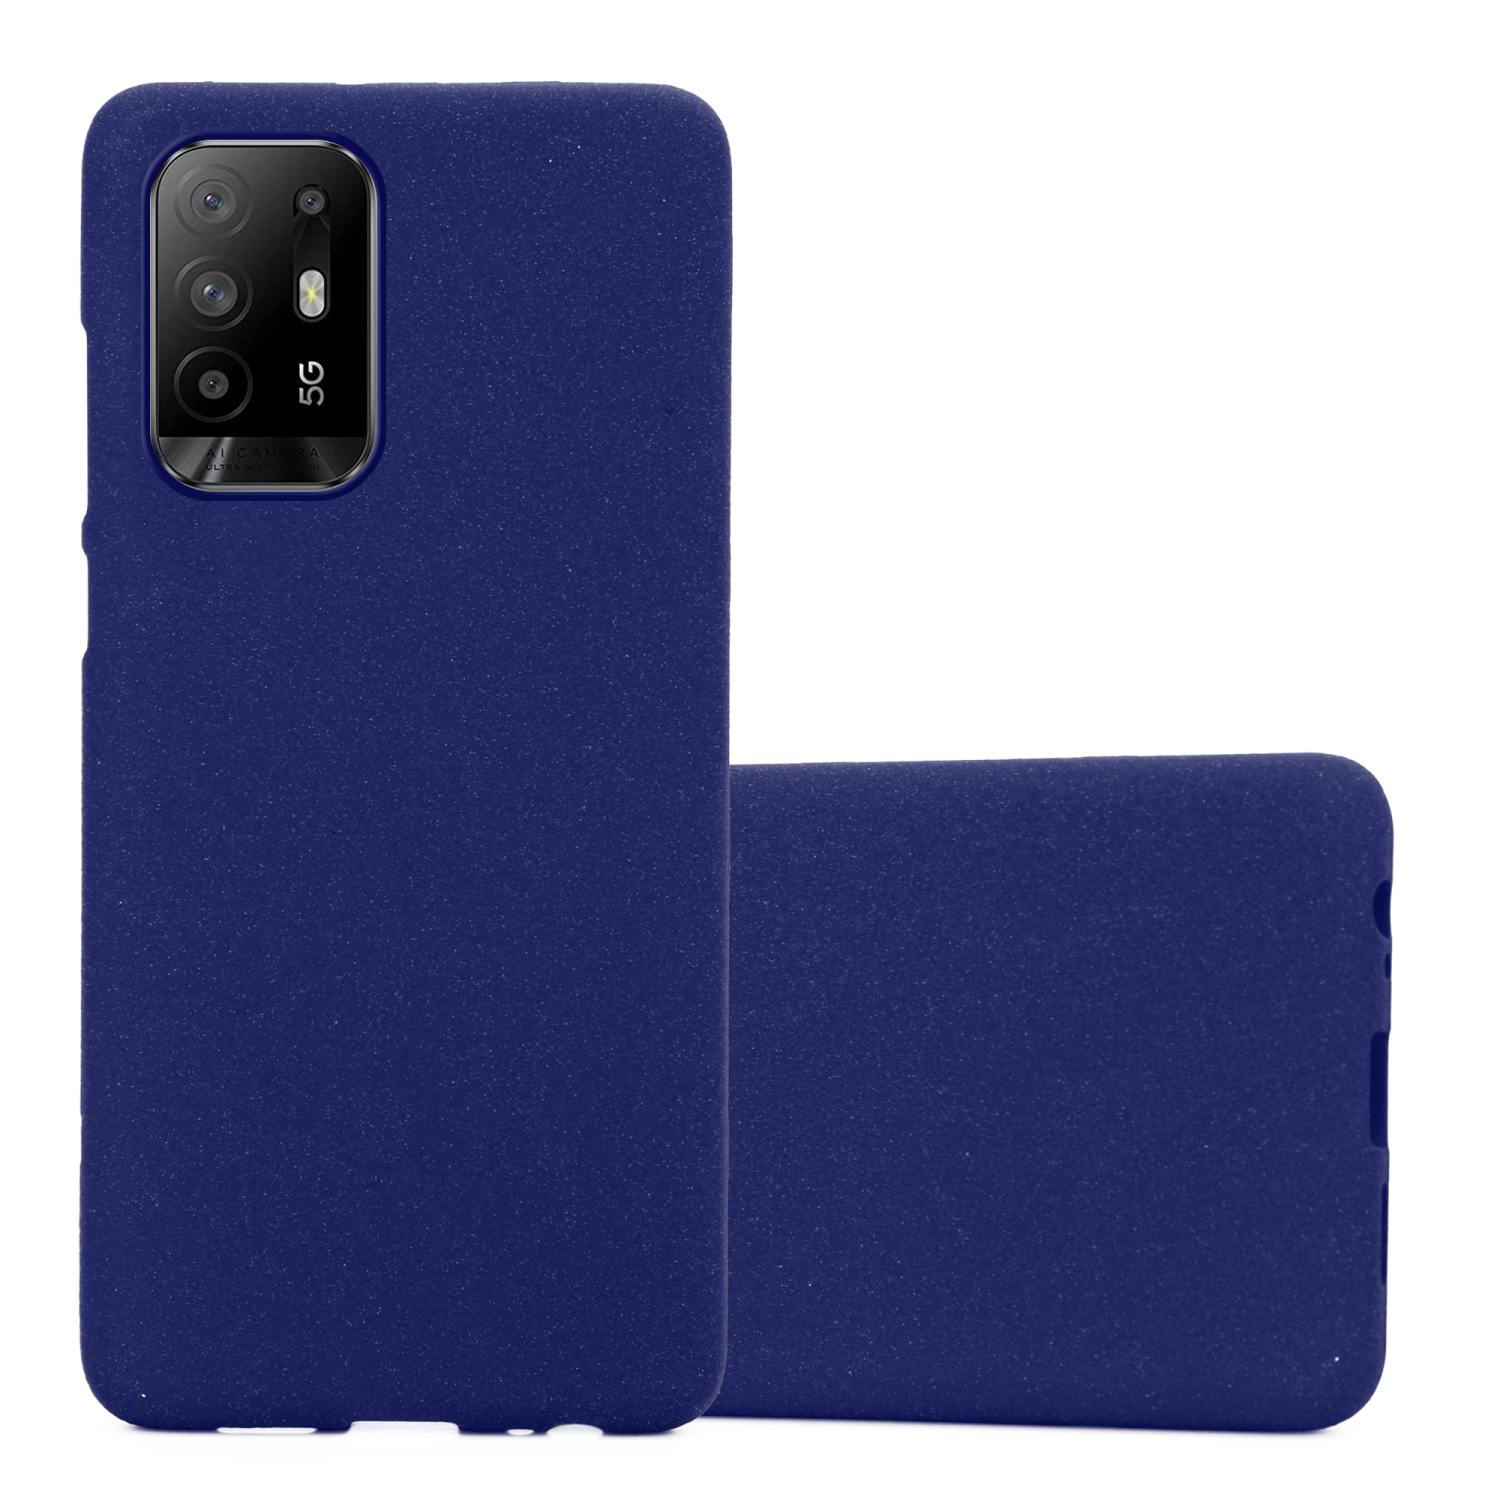 DUNKEL CADORABO 5G, Schutzhülle, TPU A94 FROST Backcover, BLAU Frosted Oppo,